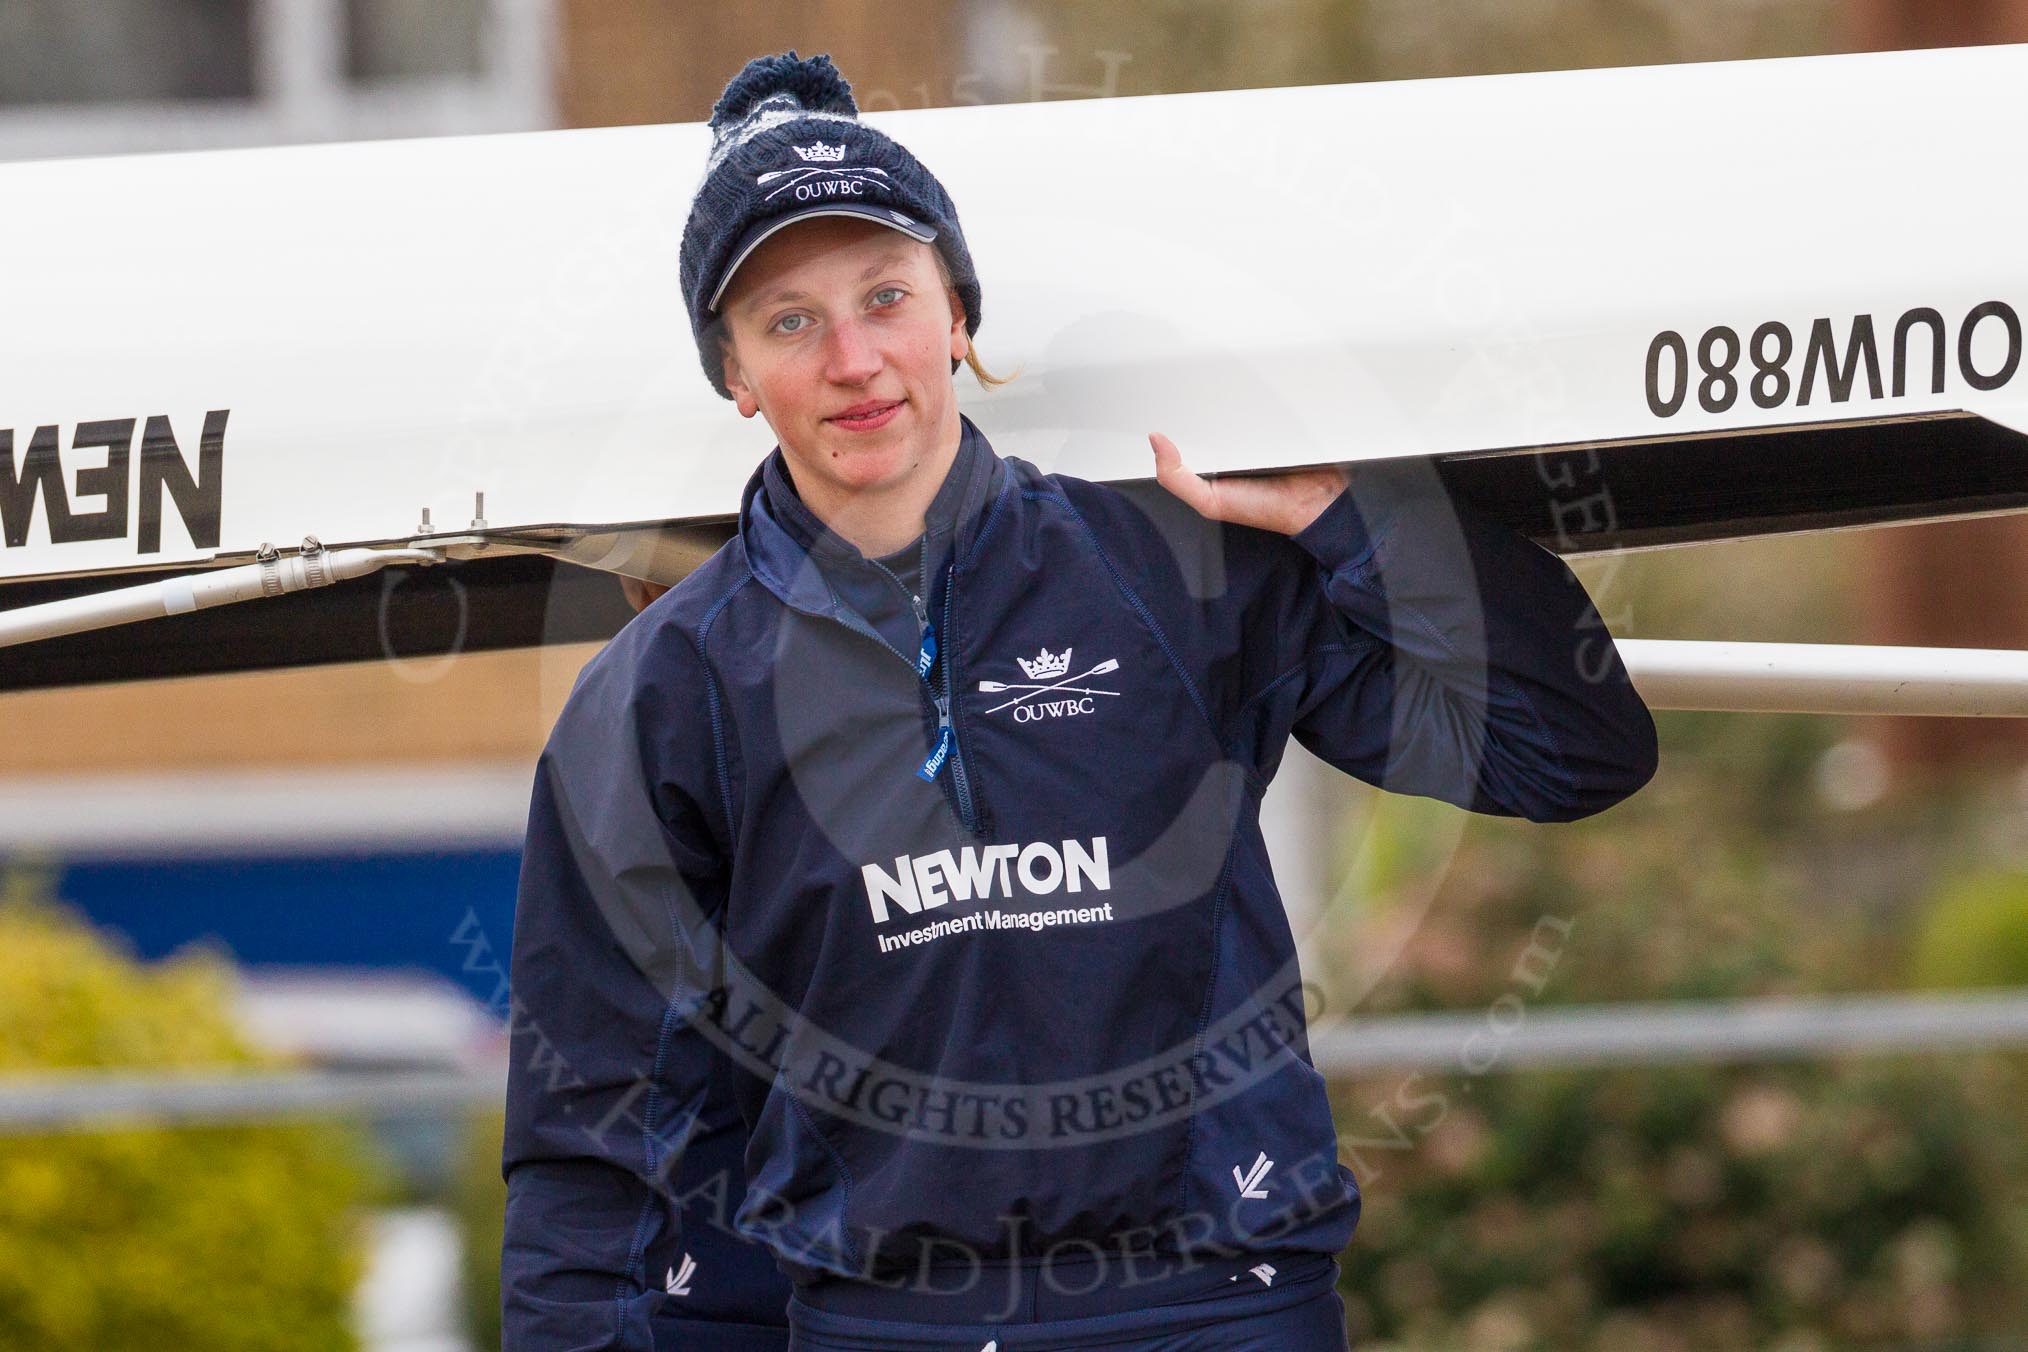 The Boat Race season 2016 - OUWBC training Wallingford: Georgie Daniell, bow in Osiris, the OUWBC reserve boat.
River Thames,
Wallingford,
Oxfordshire,

on 29 February 2016 at 15:15, image #24